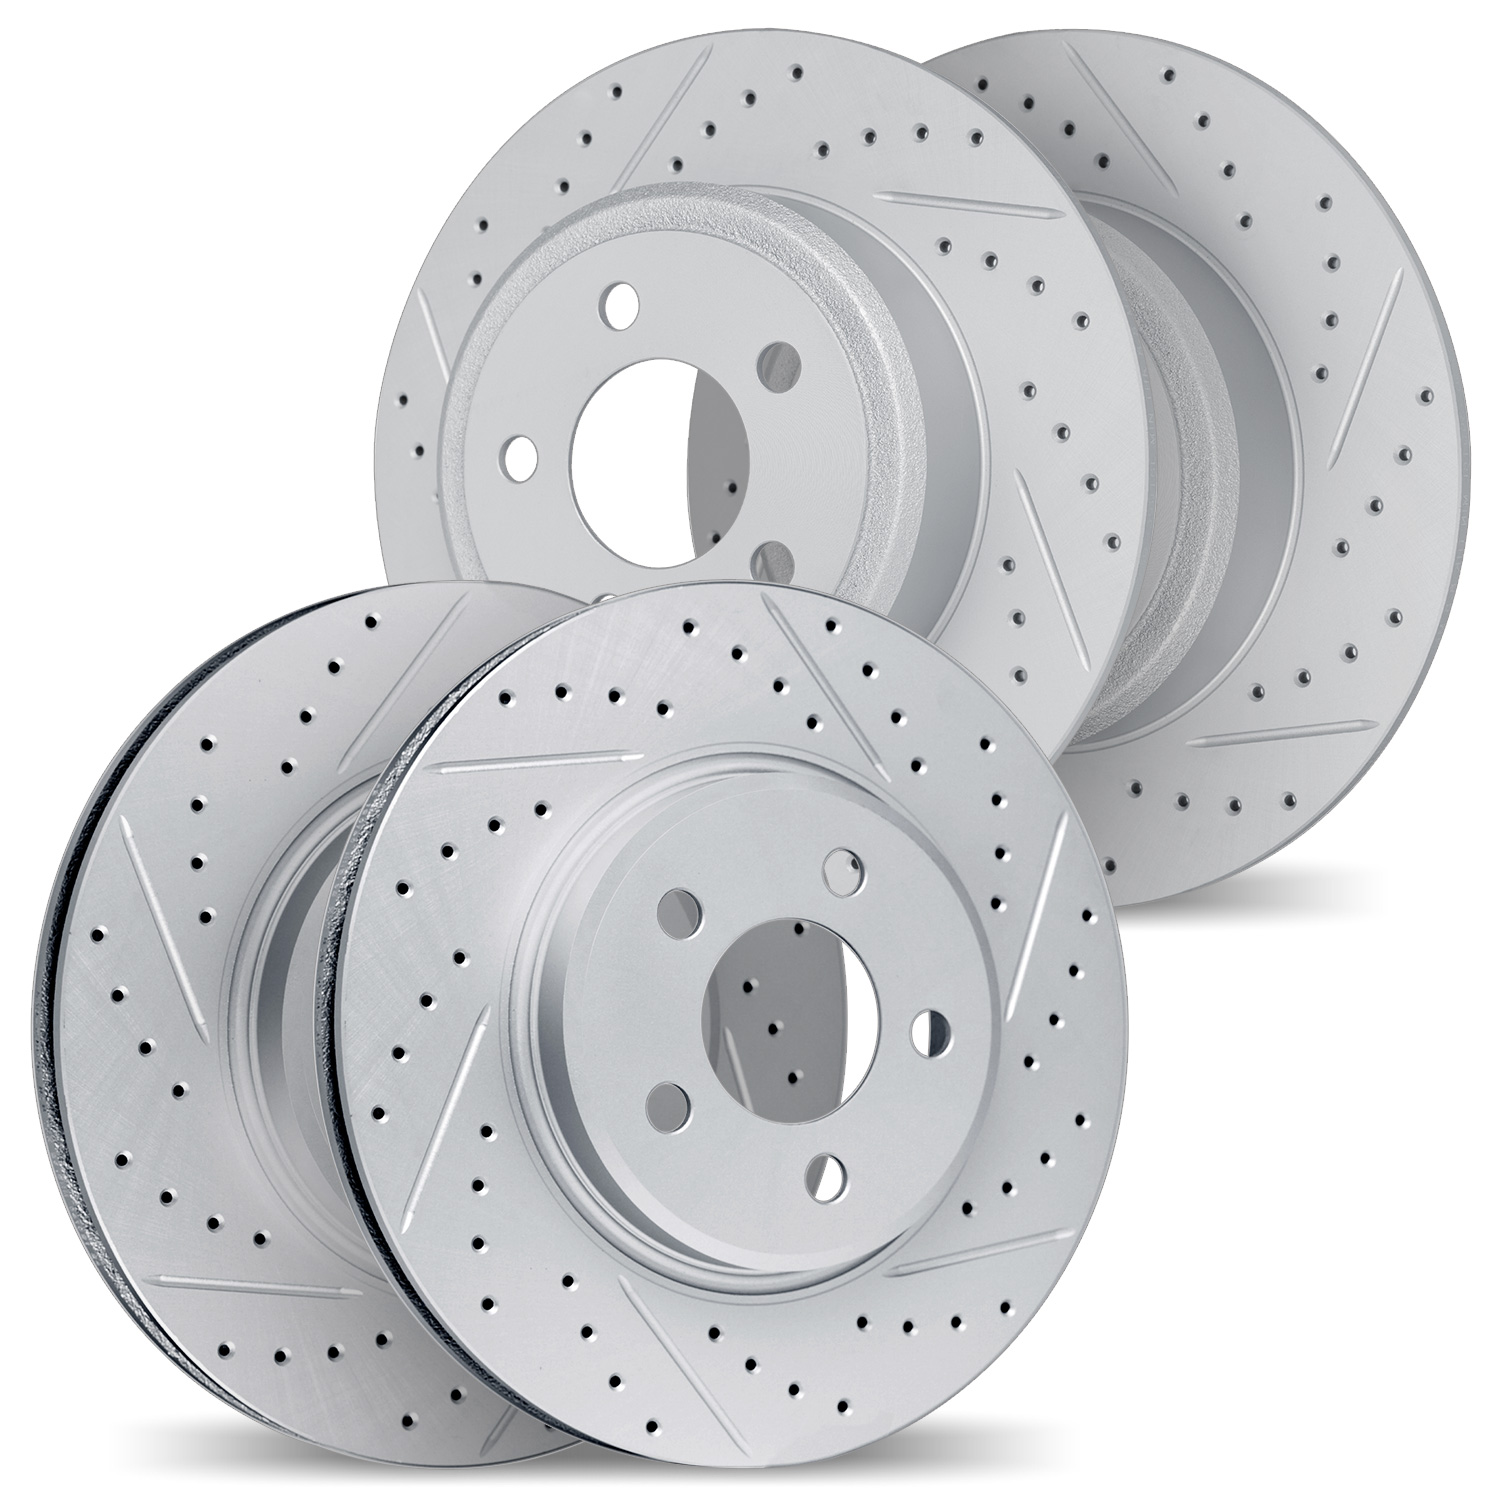 2004-27007 Geoperformance Drilled/Slotted Brake Rotors, 2004-2013 Volvo, Position: Front and Rear